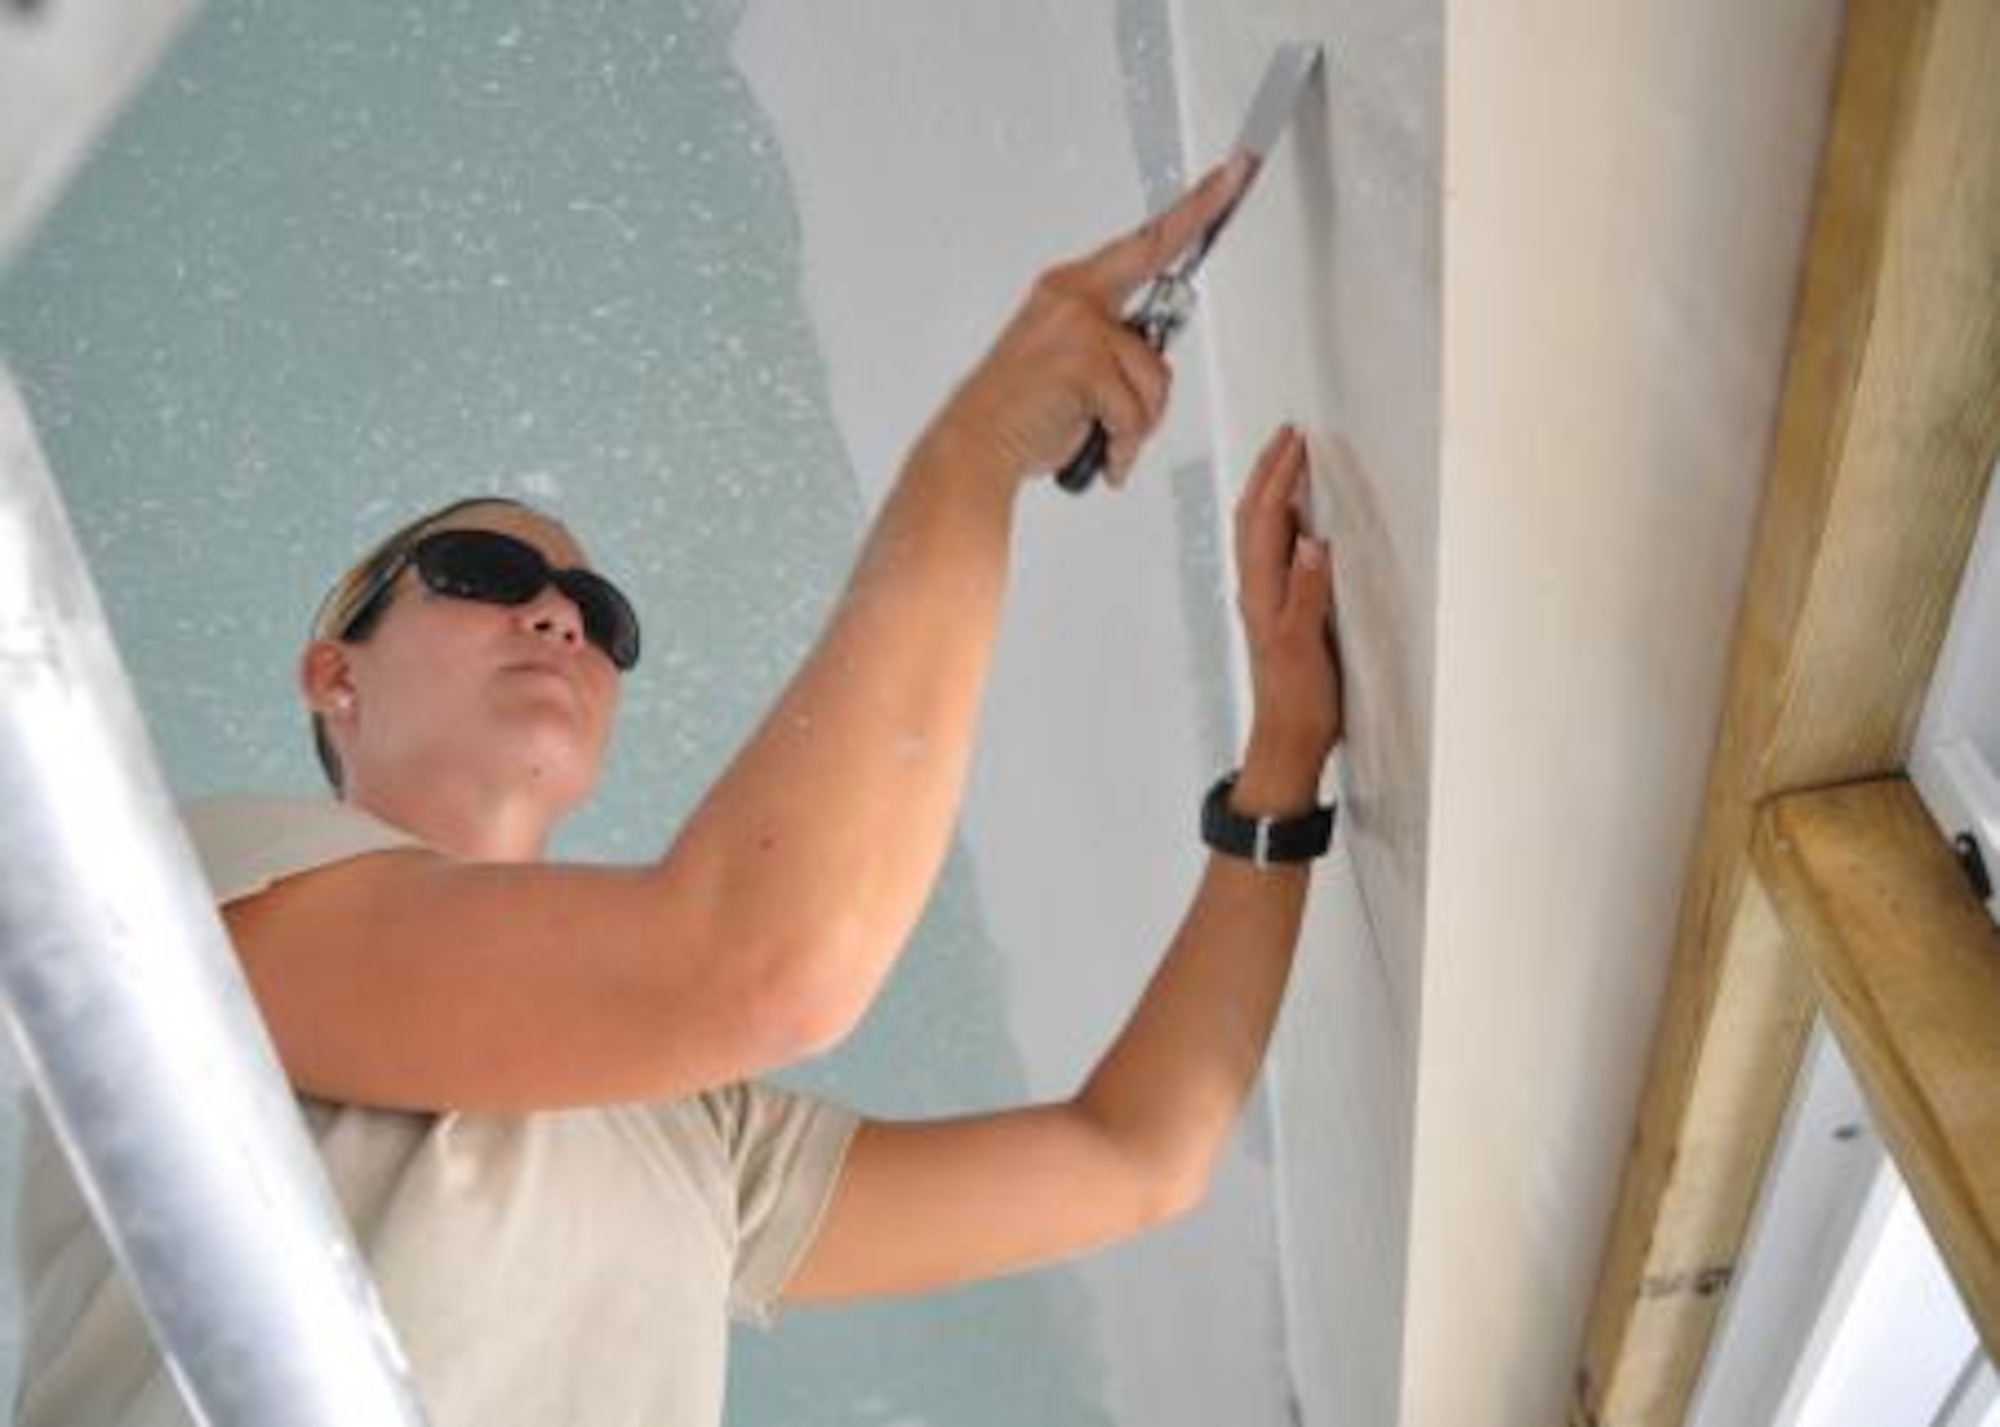 Senior Airman Stephanie Cannon, medical technician from the 92nd Medical Operations Squadron removes excess texture coating from the walls of Crooked Tree Government Primary School May 24, 2013. Civil Engineers from both the U.S. and Belize are constructing various structures at schools throughout Belize as part of an exercise called New Horizons. Building these facilities will support further education for the children of the country and provide valuable training for U.S. and Belizean service members. (U.S. Air Force photo/Capt. Holly Hess)
